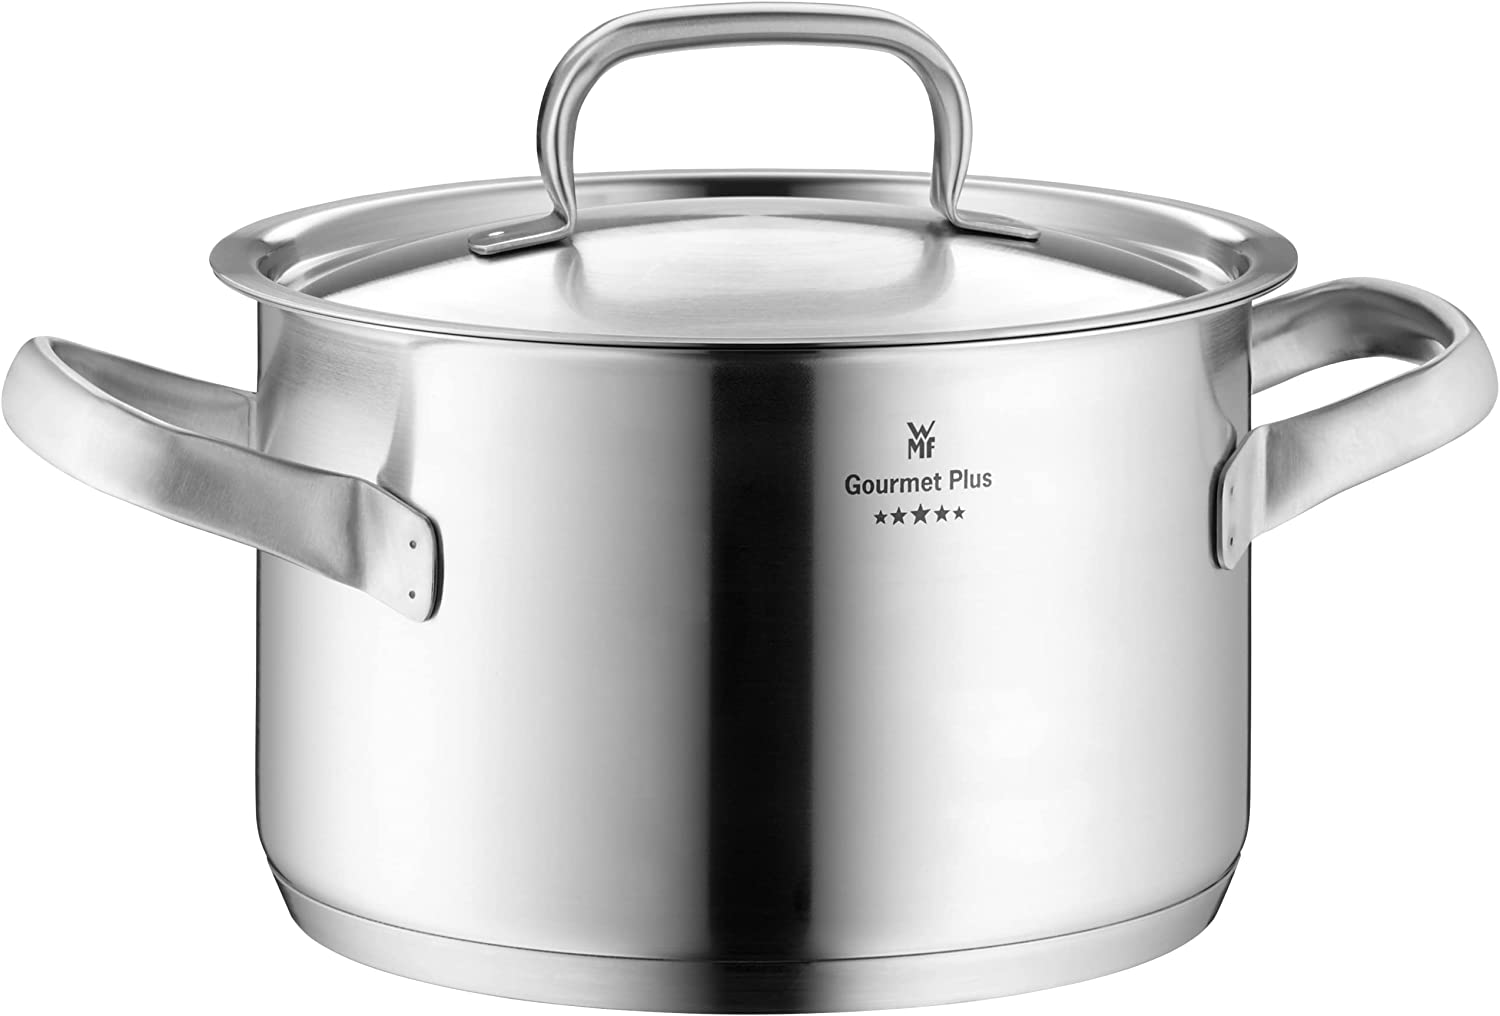 WMF cookware Ø 16 cm approx. 1,9l Gourmet Plus Inside scaling vapor hole hollow side handles metal lid Cromargan stainless steel suitable for all stove tops including induction dishwasher-safe